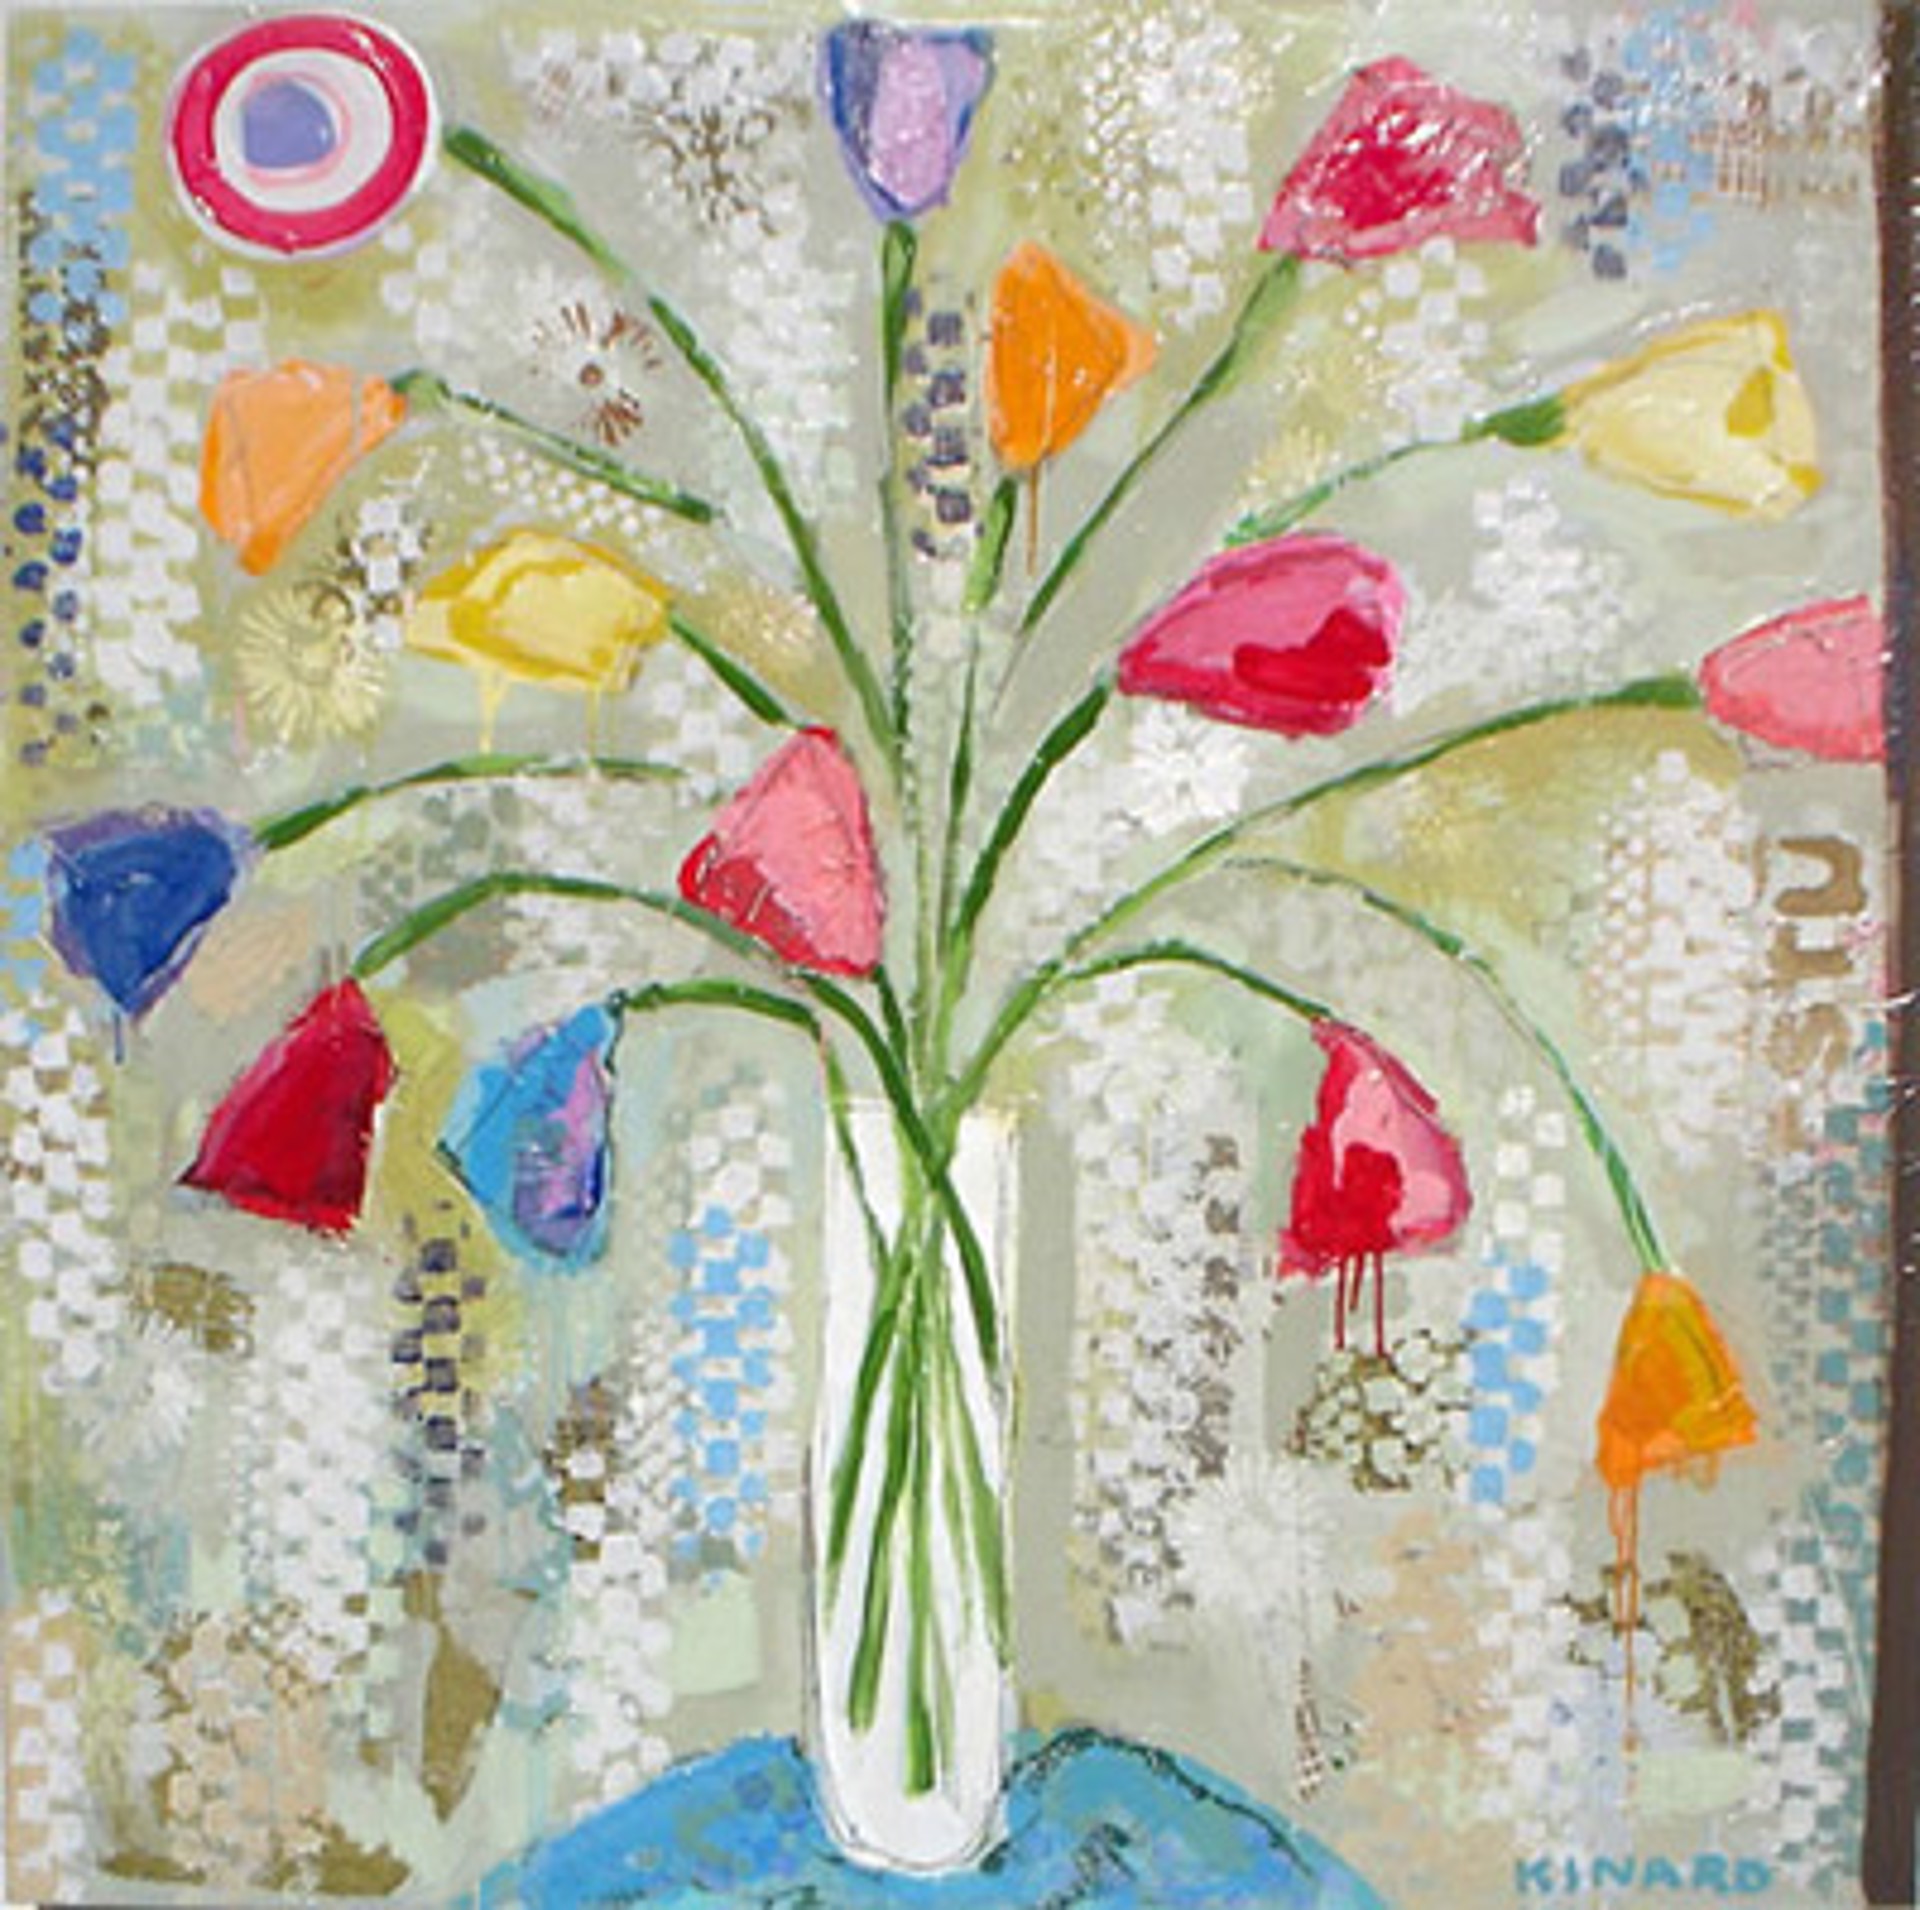 A Love For Tulips by Christy Kinard